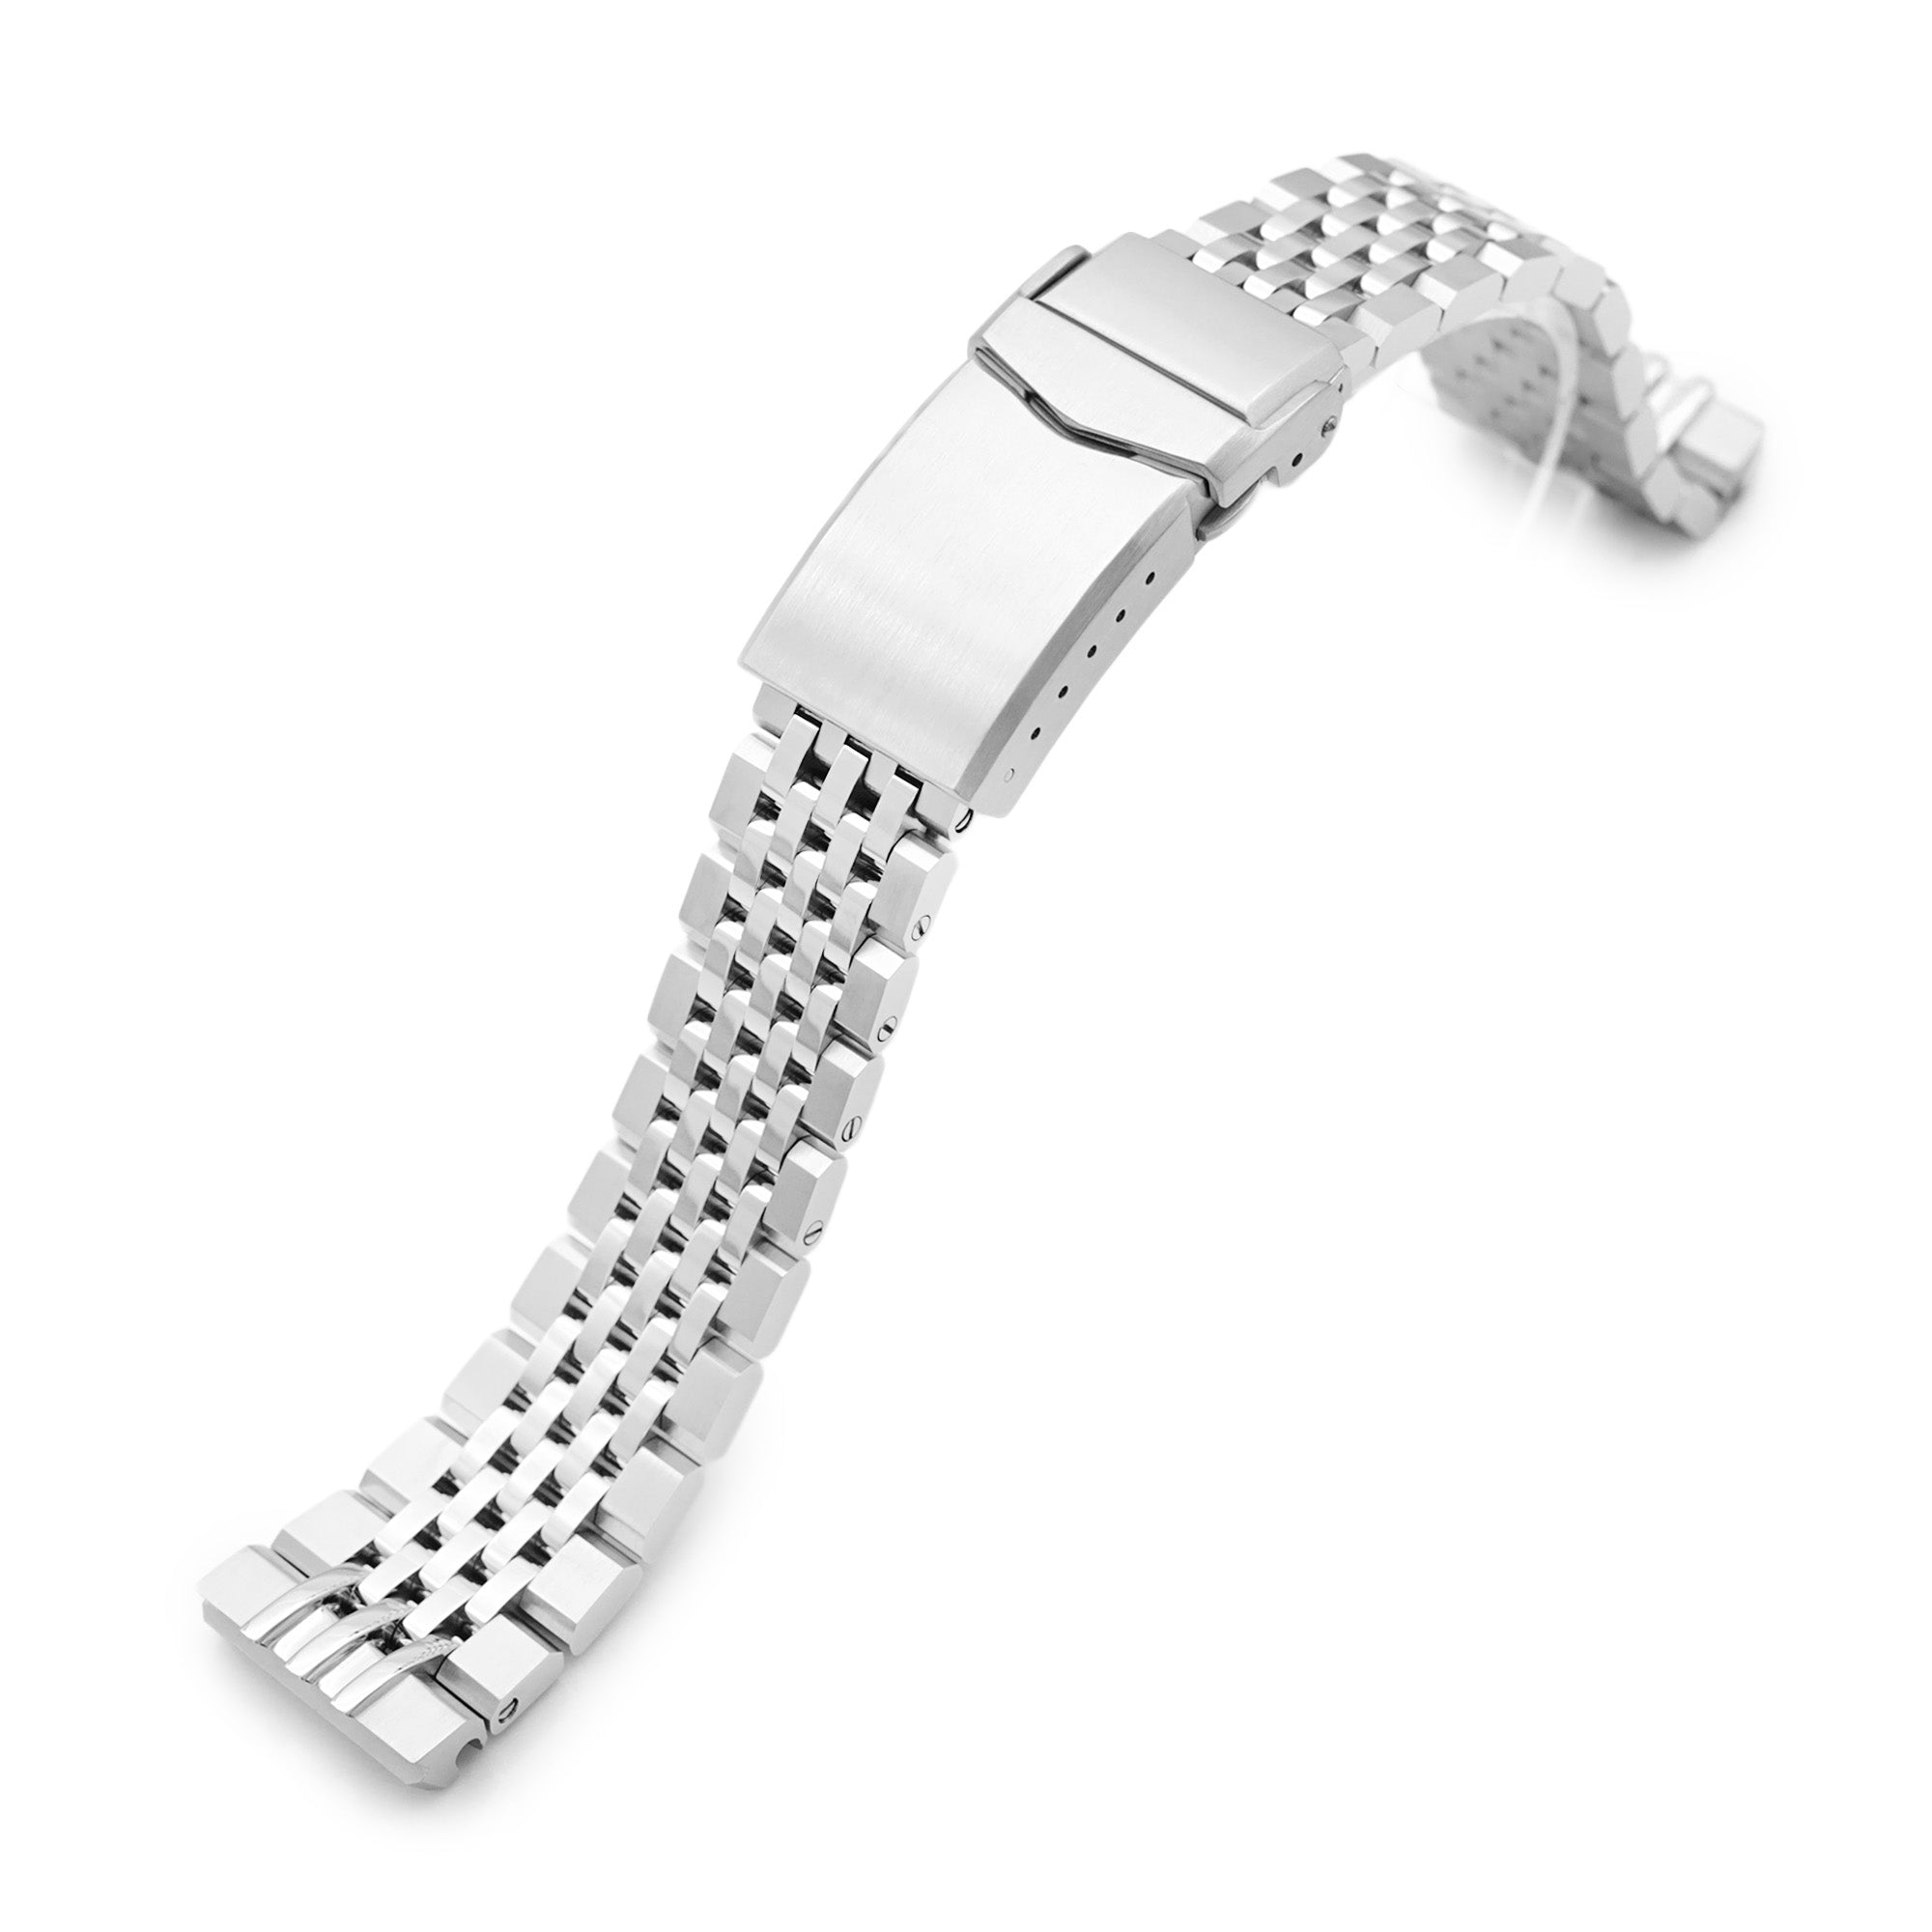 20mm Asteroid Watch Band for Seiko SPB143 63Mas 40.5mm, 316L Stainless Steel Brushed and Polished V-Clasp Strapcode Watch Bands